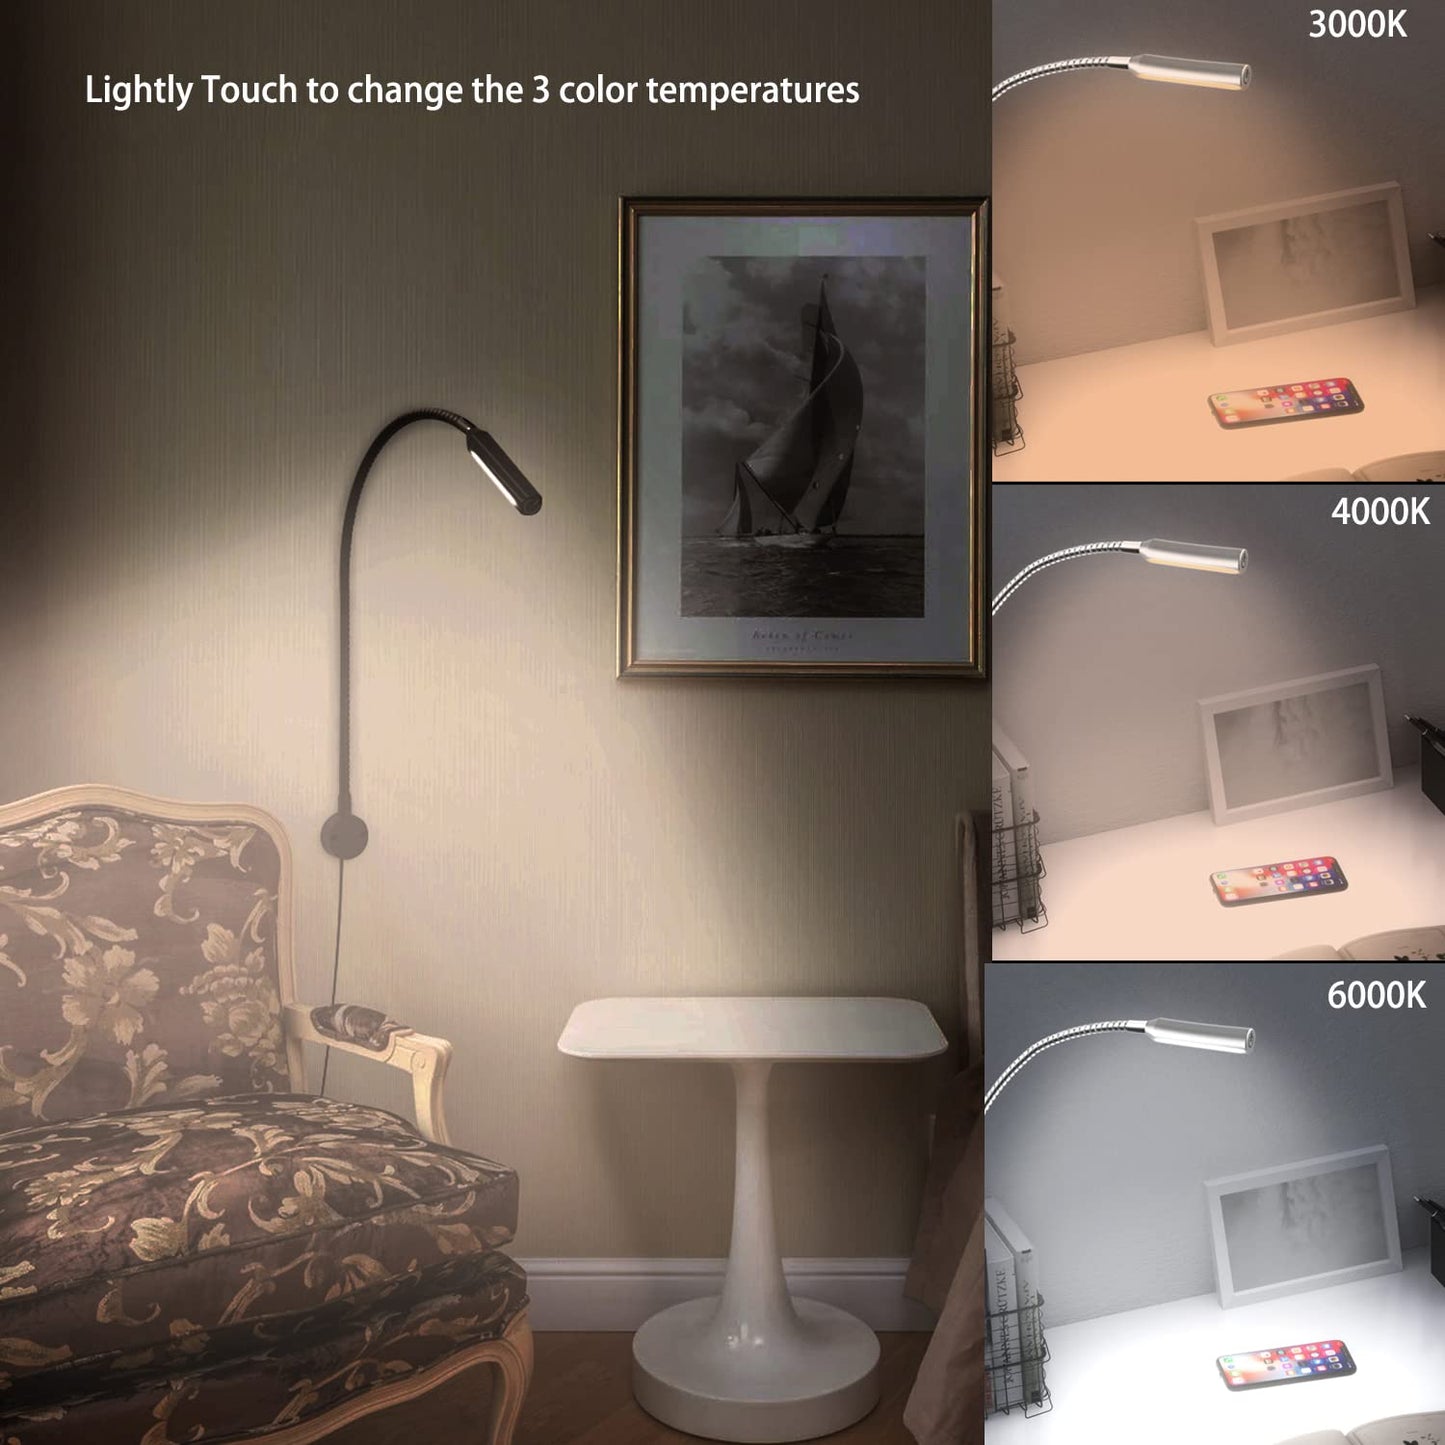 RL18 Book Reading Light for Bed, Headboard Wall Lamp, Reading Lamp Touch to Adjust Color Temperature and Brightness with USB Charging Port, ETL-Listed